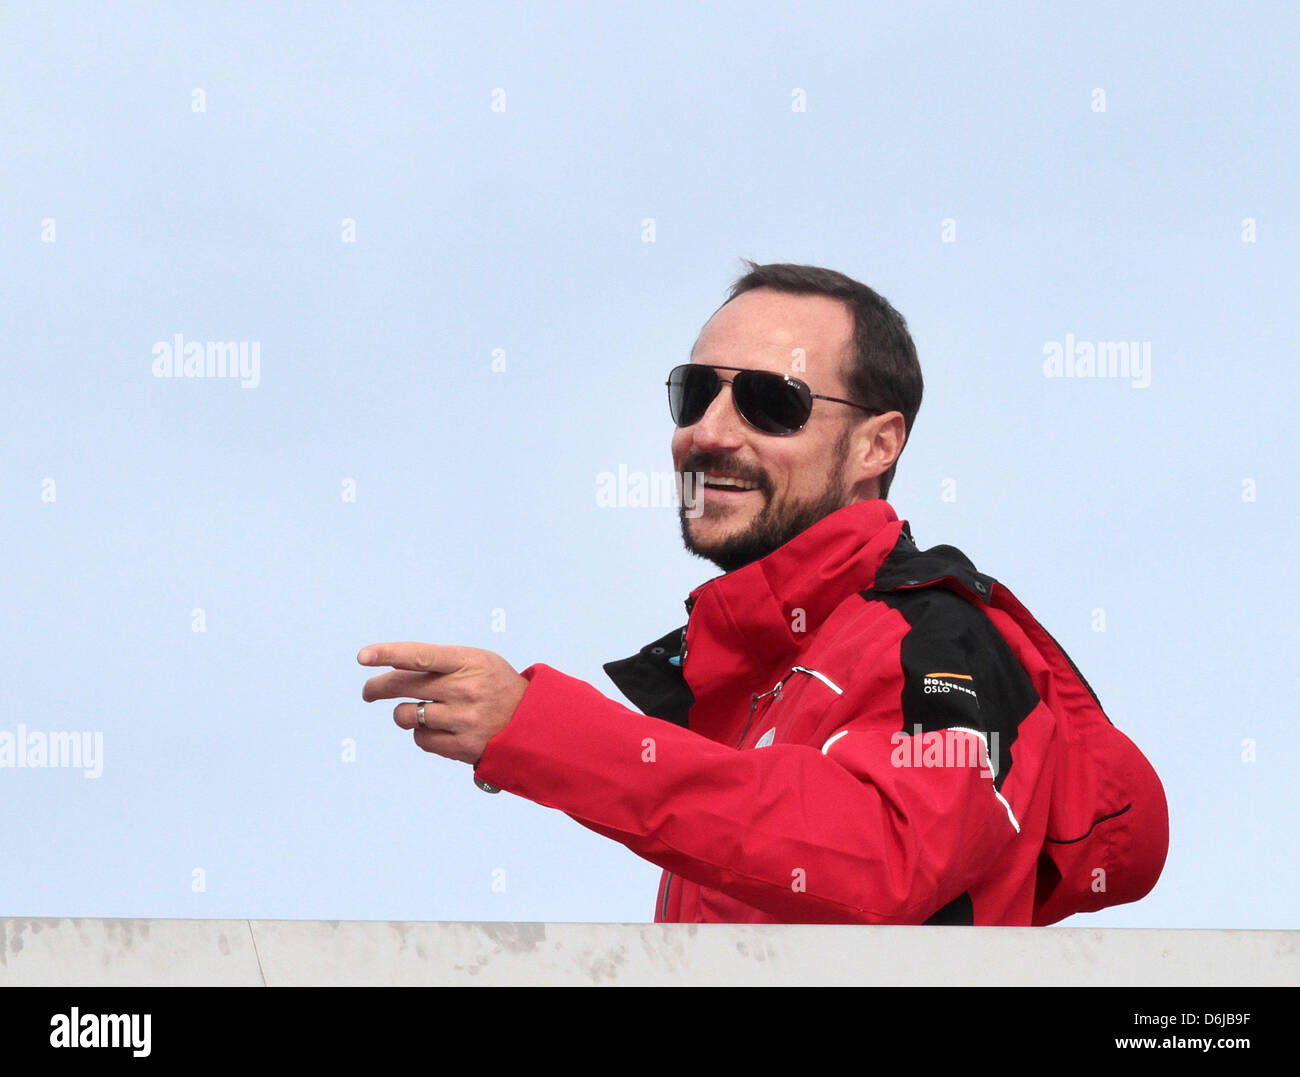 Crown Prince Haakon of Norway visit the ski jumping FIS World Cup at the Holmenkollen in Oslo, Norway, 11 March 2012. Photo: Albert Nieboer / NETHERLANDS OUT Stock Photo